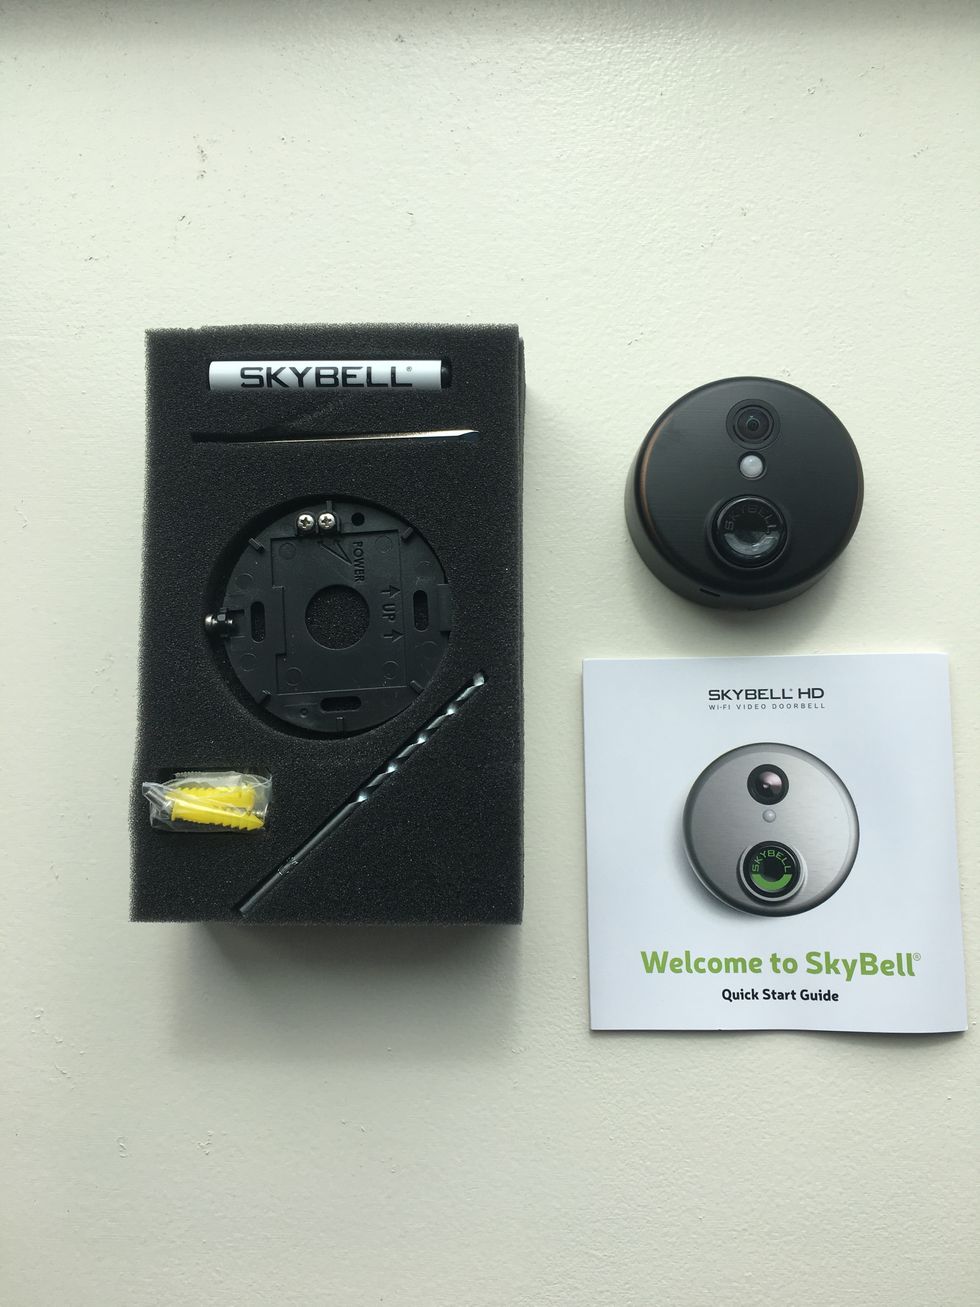 Photo of contents from inside Skybell box